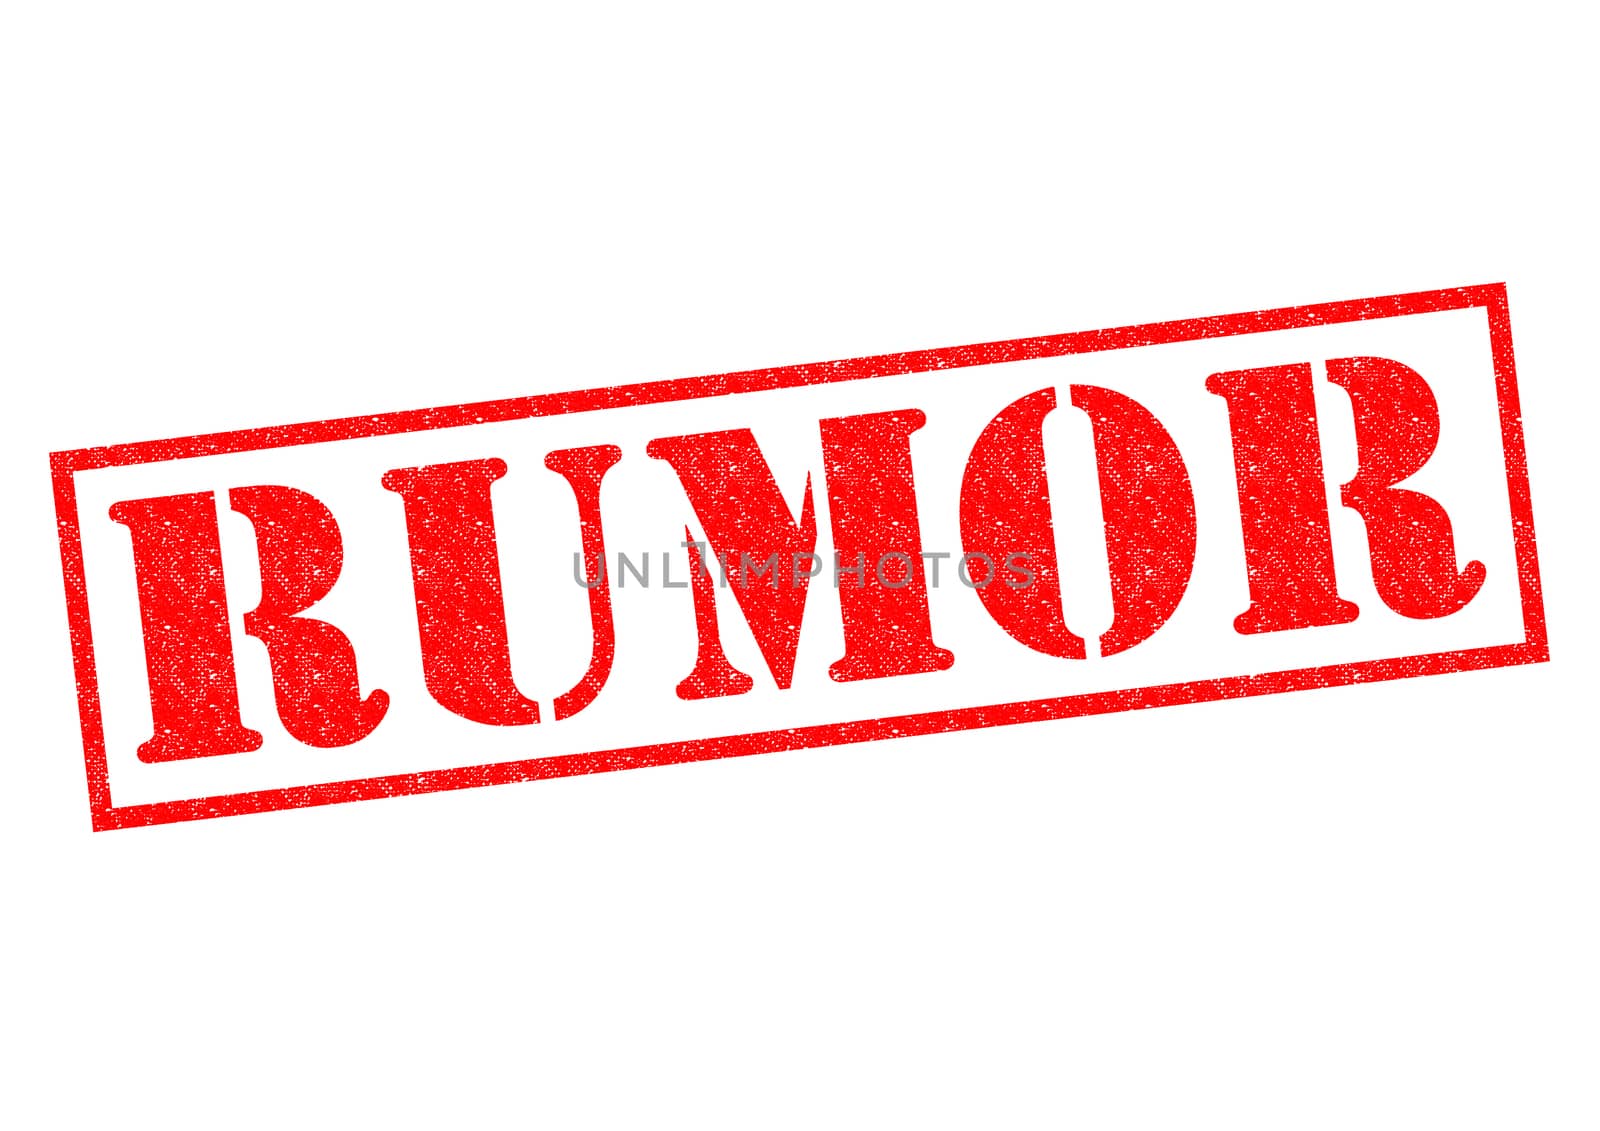 RUMOR red Rubber Stamp over a white background.